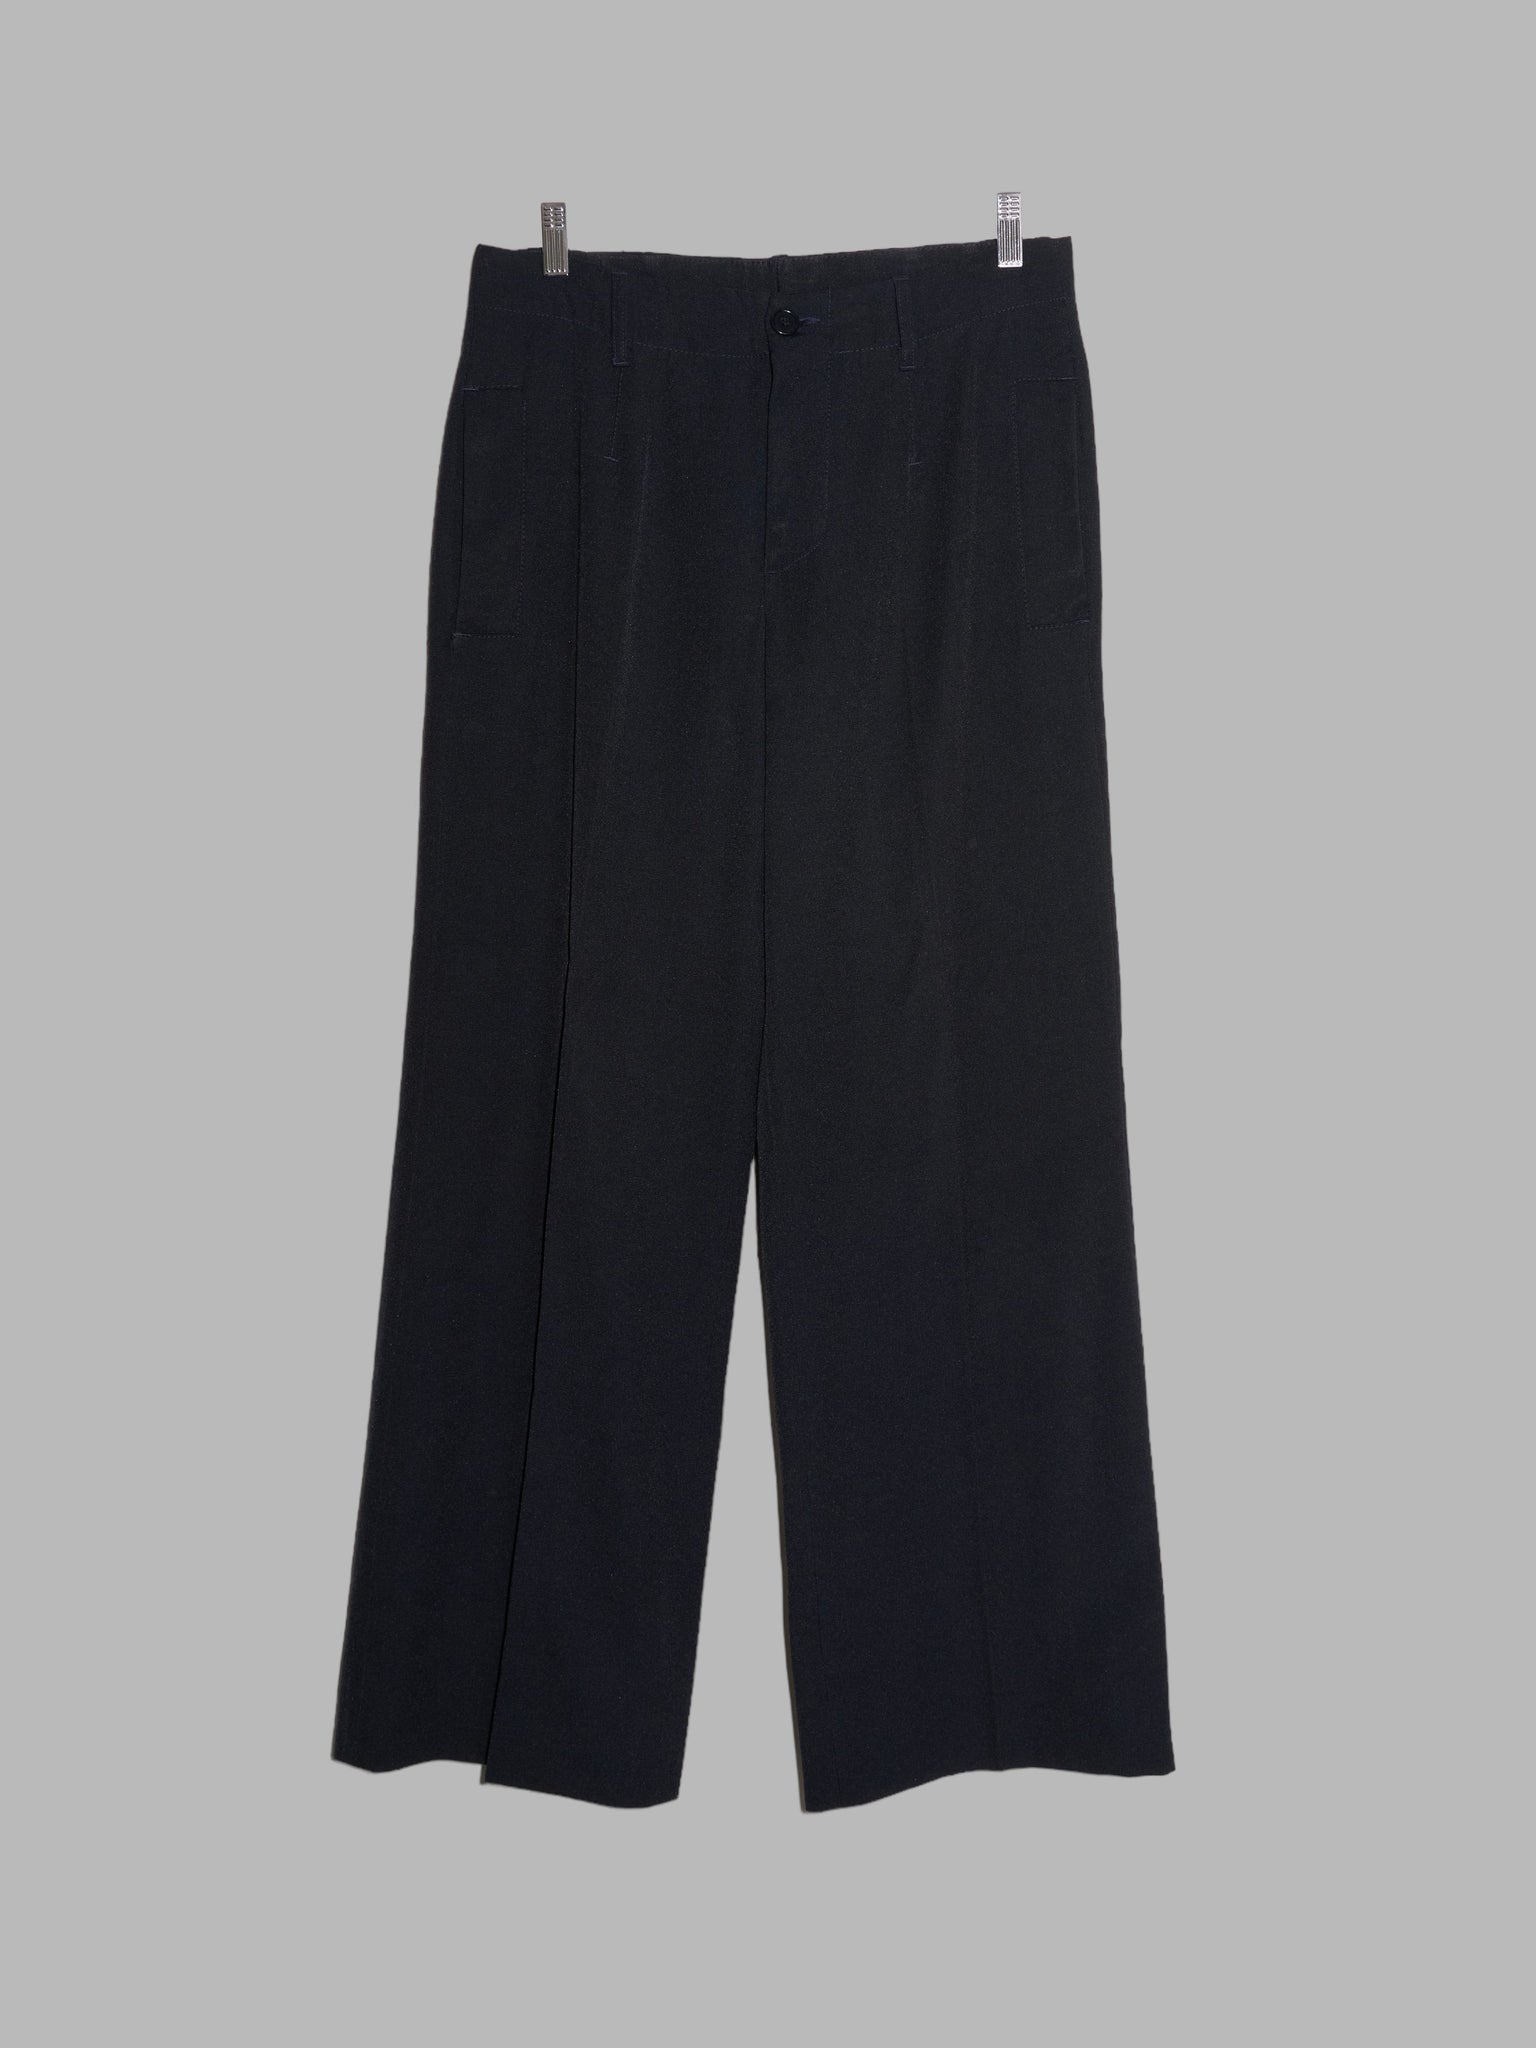 Dirk Bikkembergs black poly-cotton trousers with back cargo pocket - M S